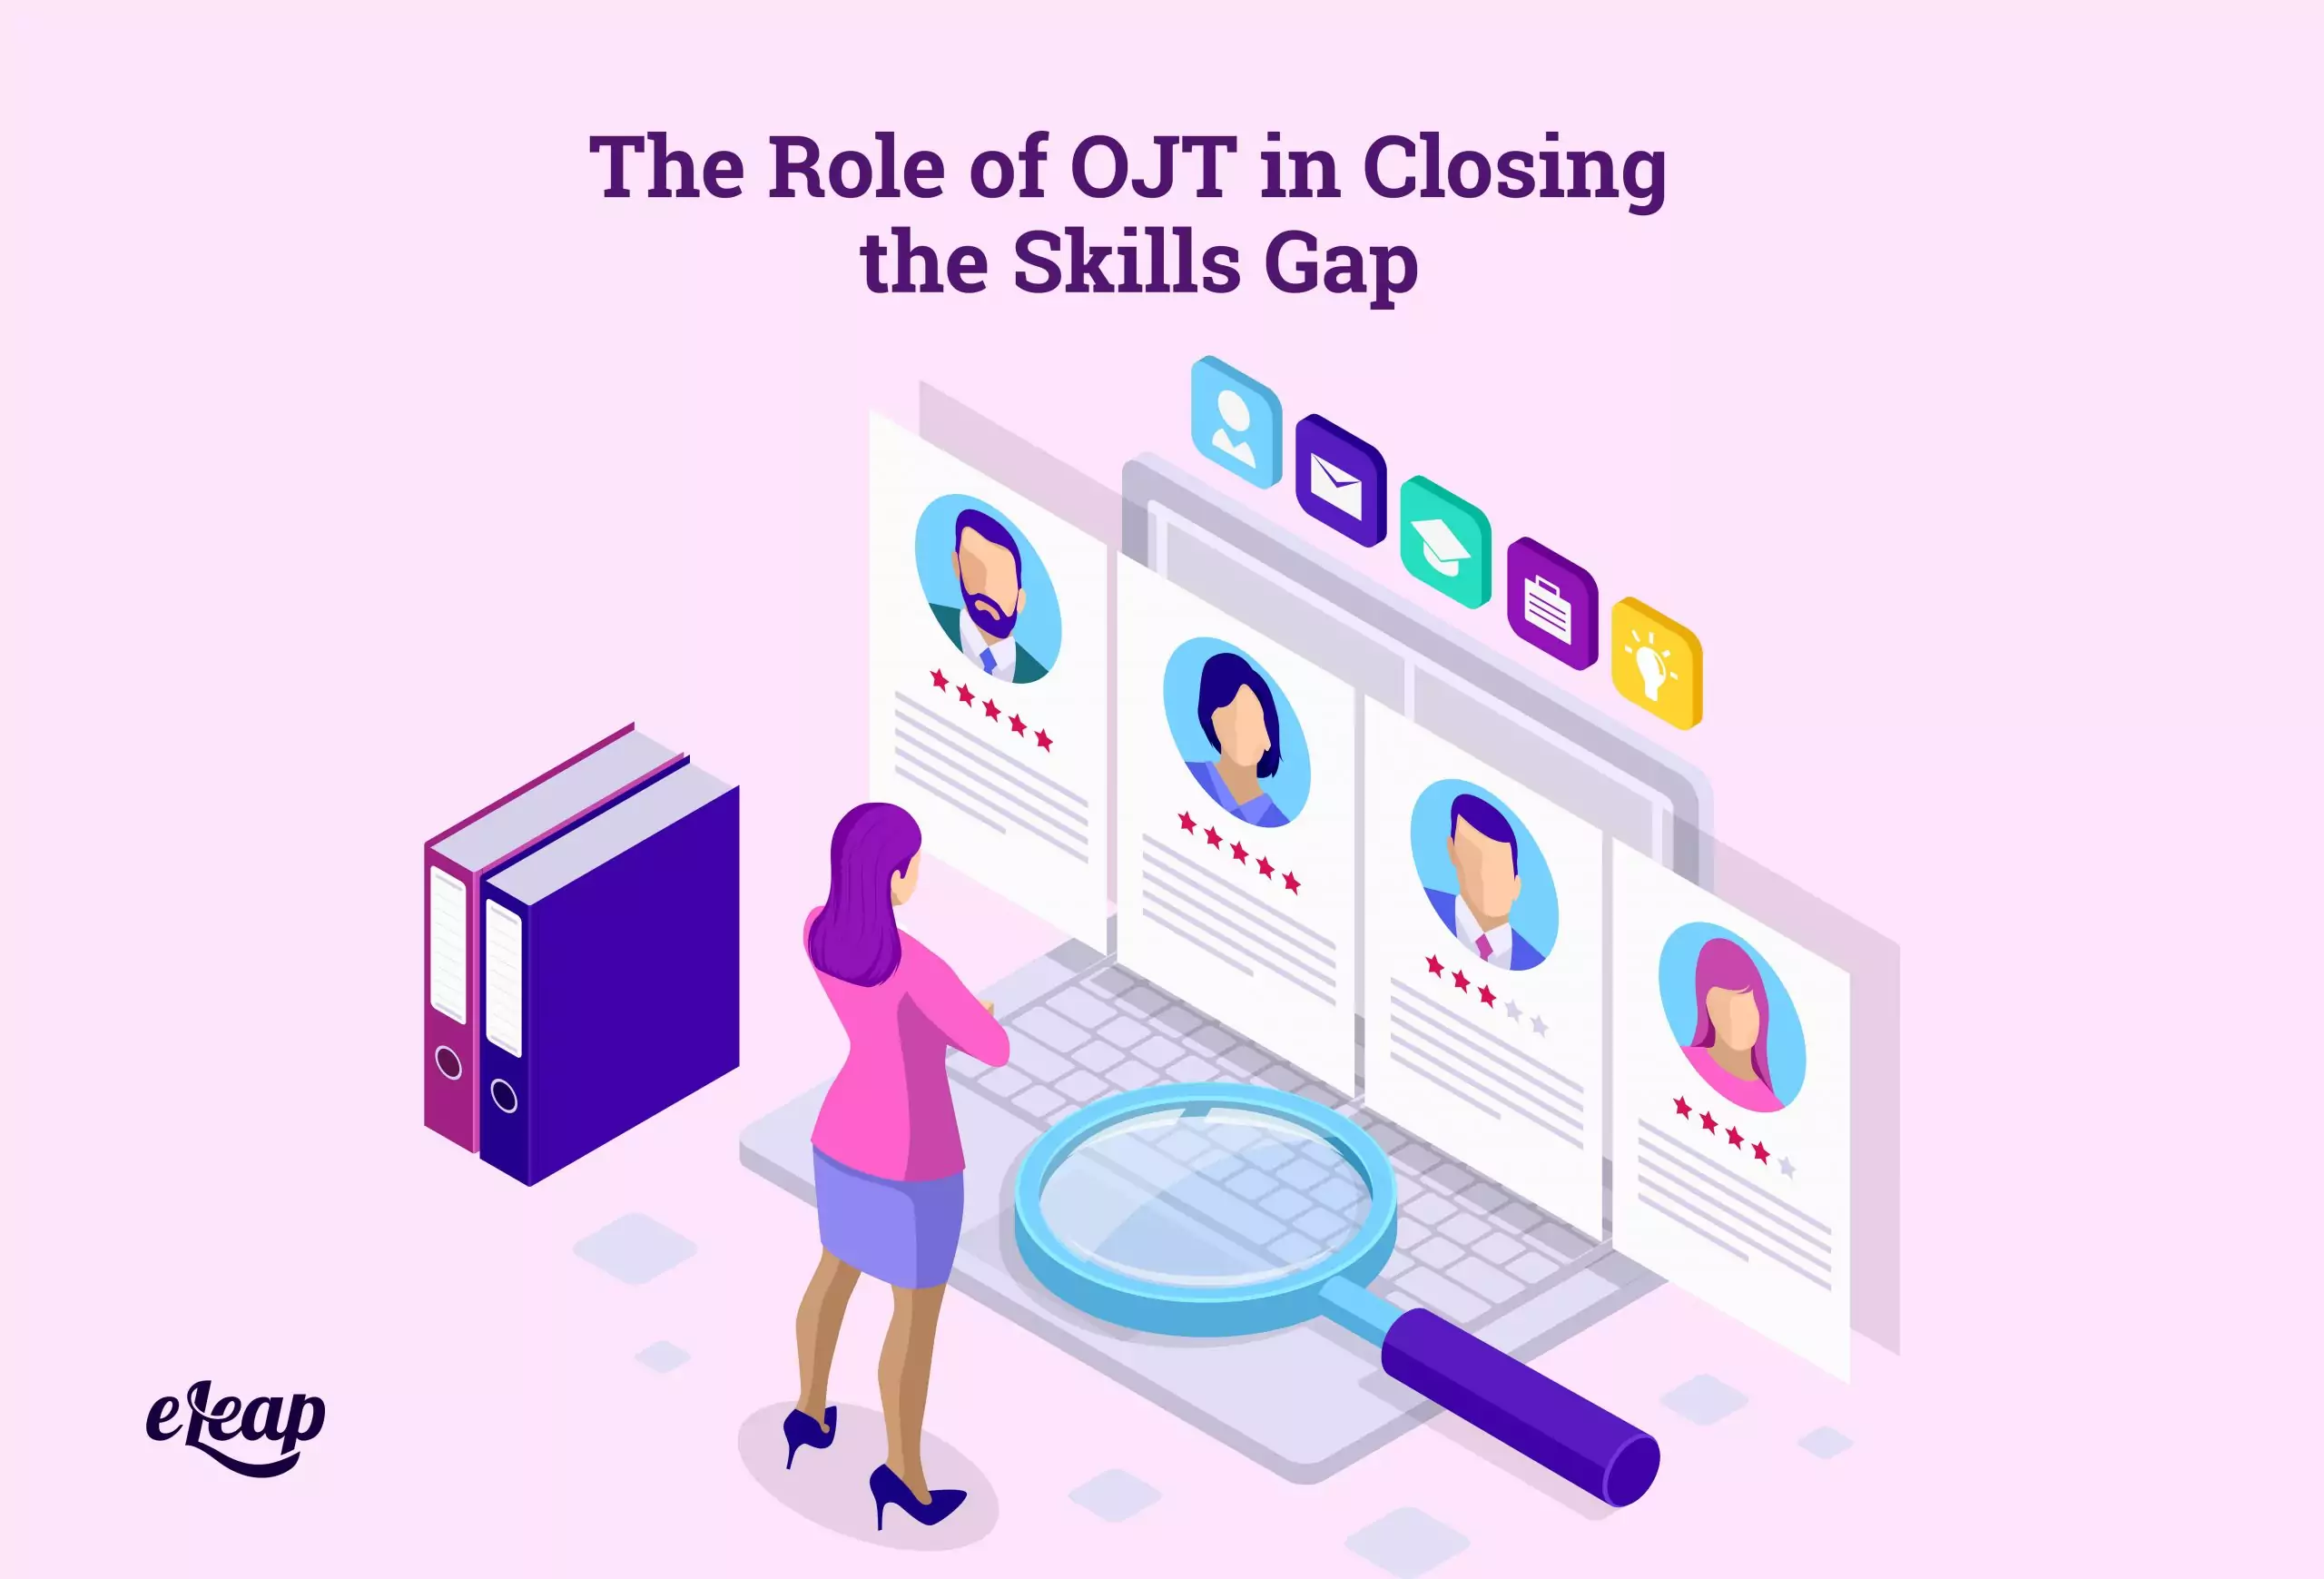 The Role of OJT in Closing the Skills Gap